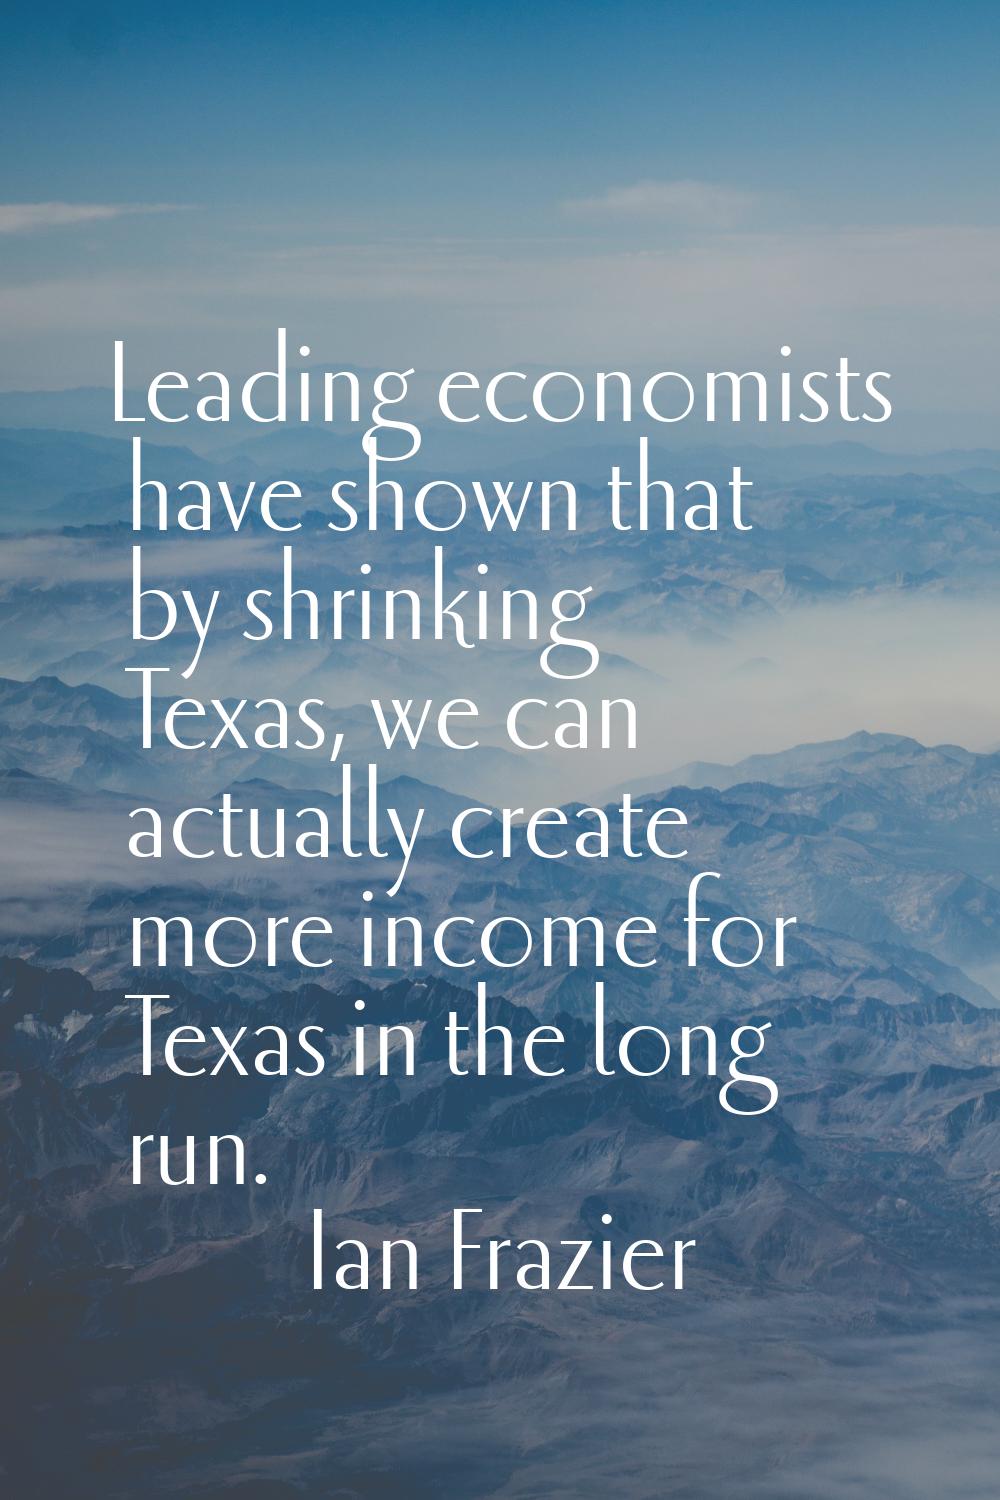 Leading economists have shown that by shrinking Texas, we can actually create more income for Texas